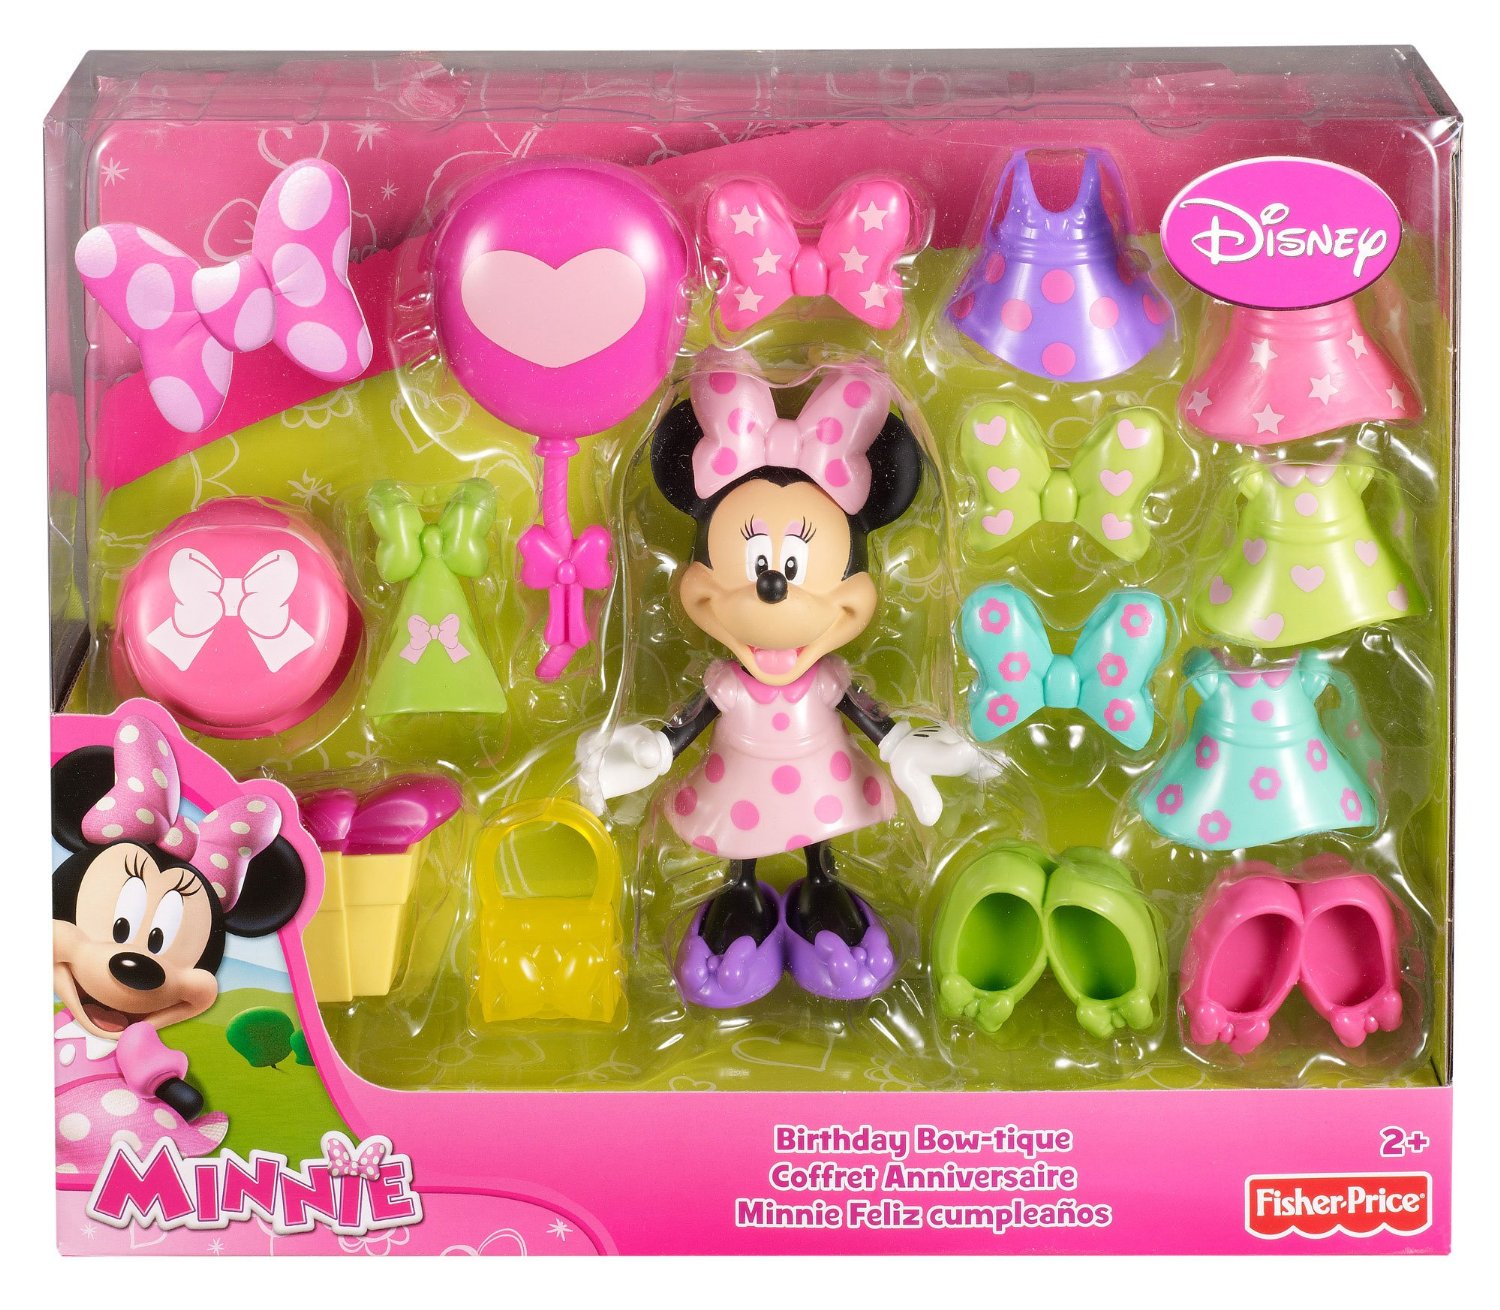 Fisher-Price Disney's Minnie Mouse Birthday Bowtique Only $11.99